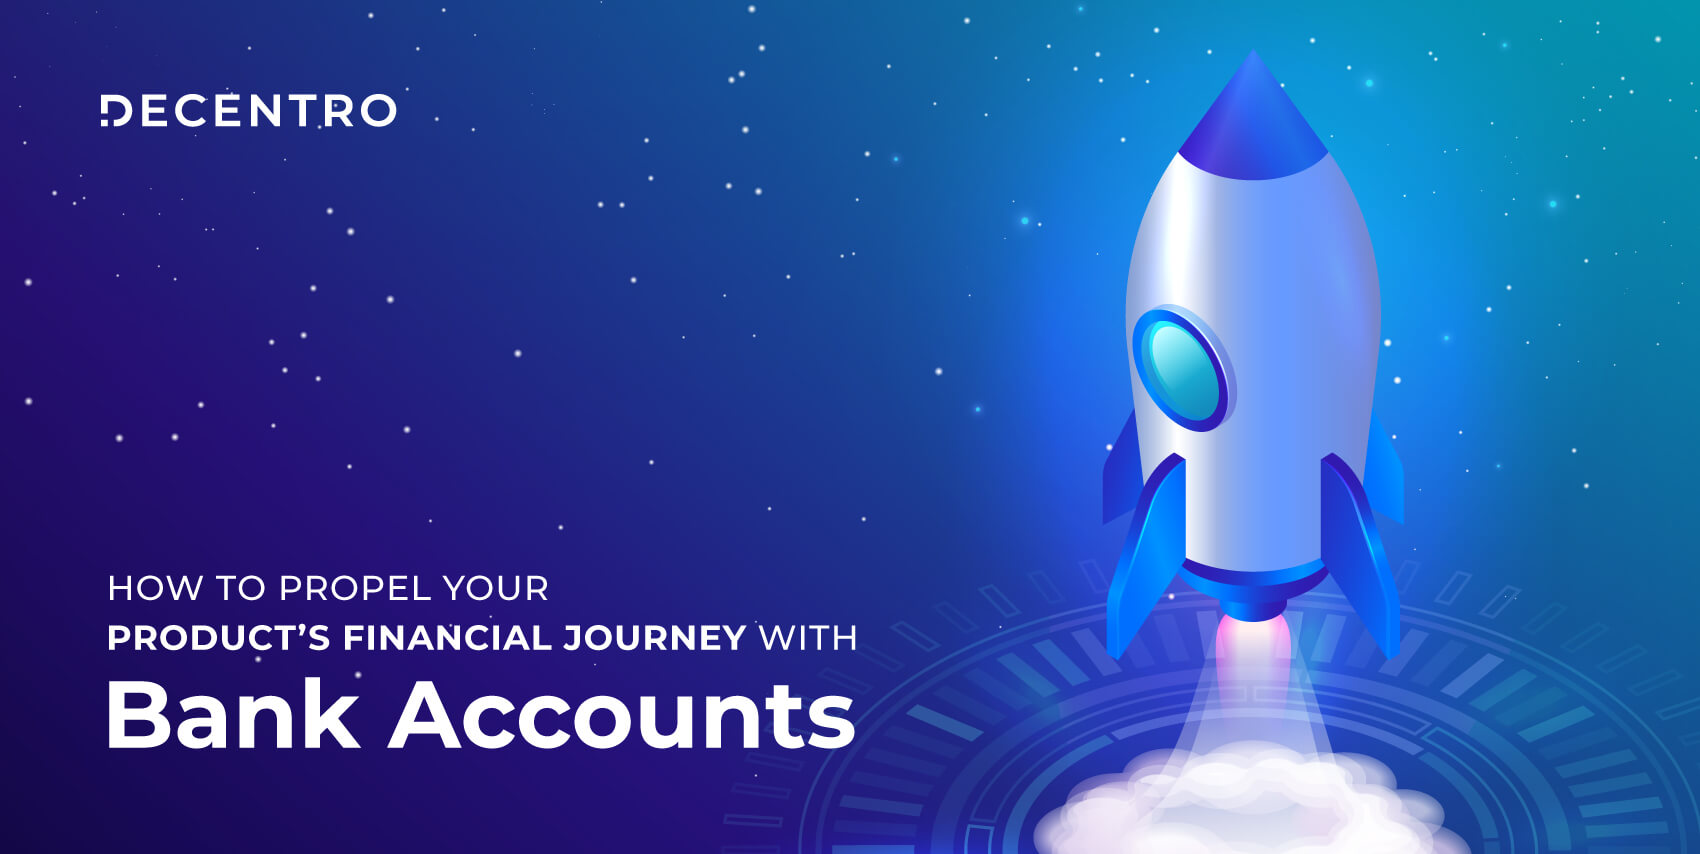 Wish to begin the fintech journey for your business? Here’s why you should choose bank accounts as the financial instrument.